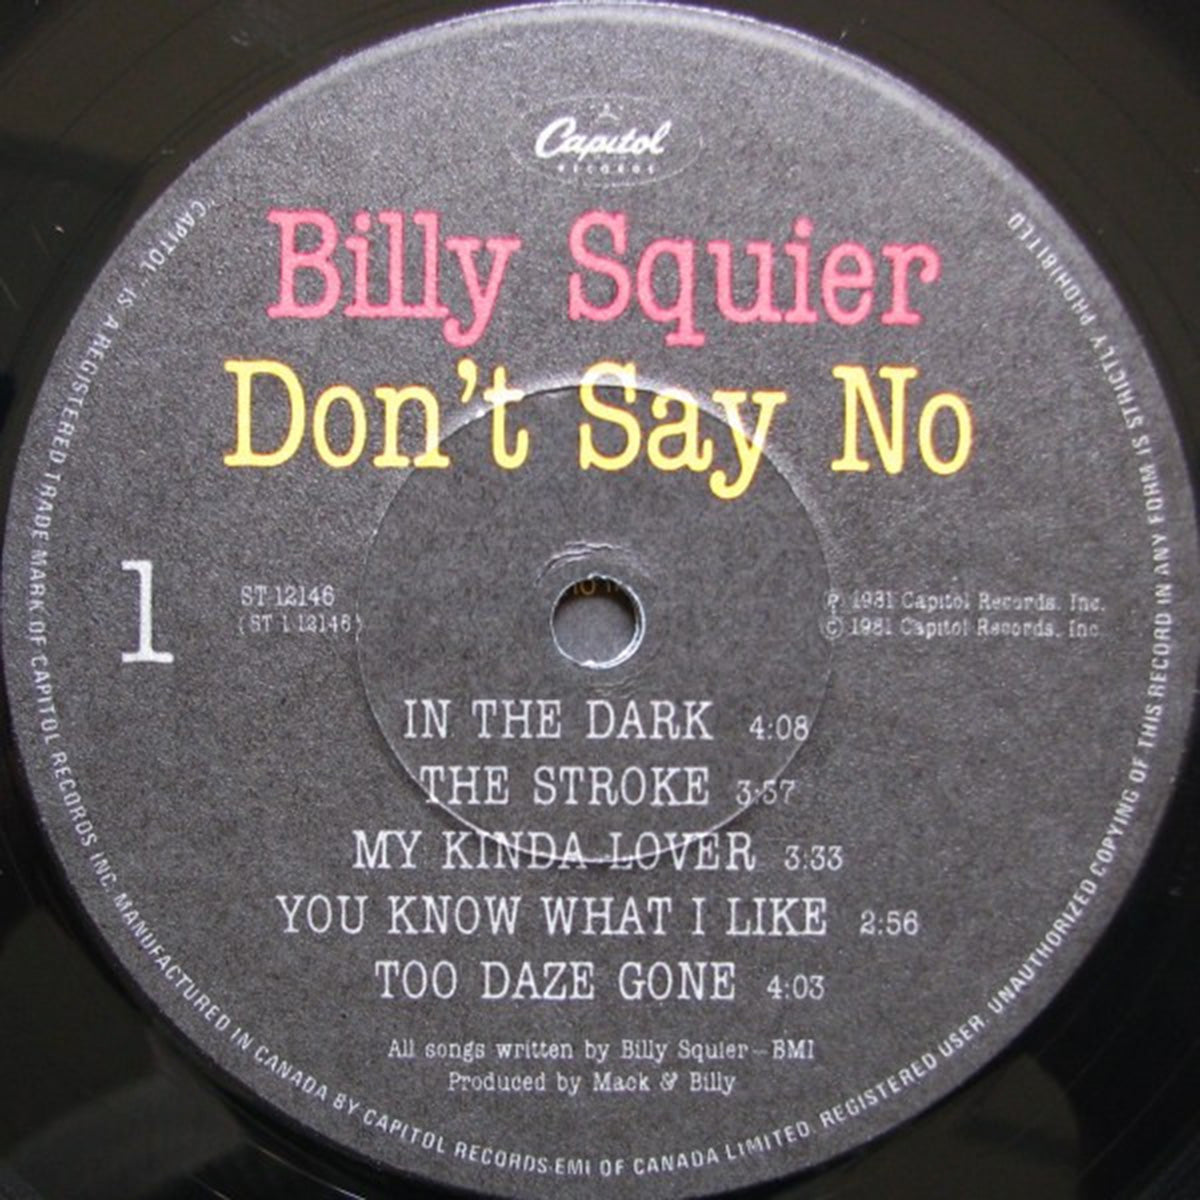 Billy Squier – Don't Say No - 1981